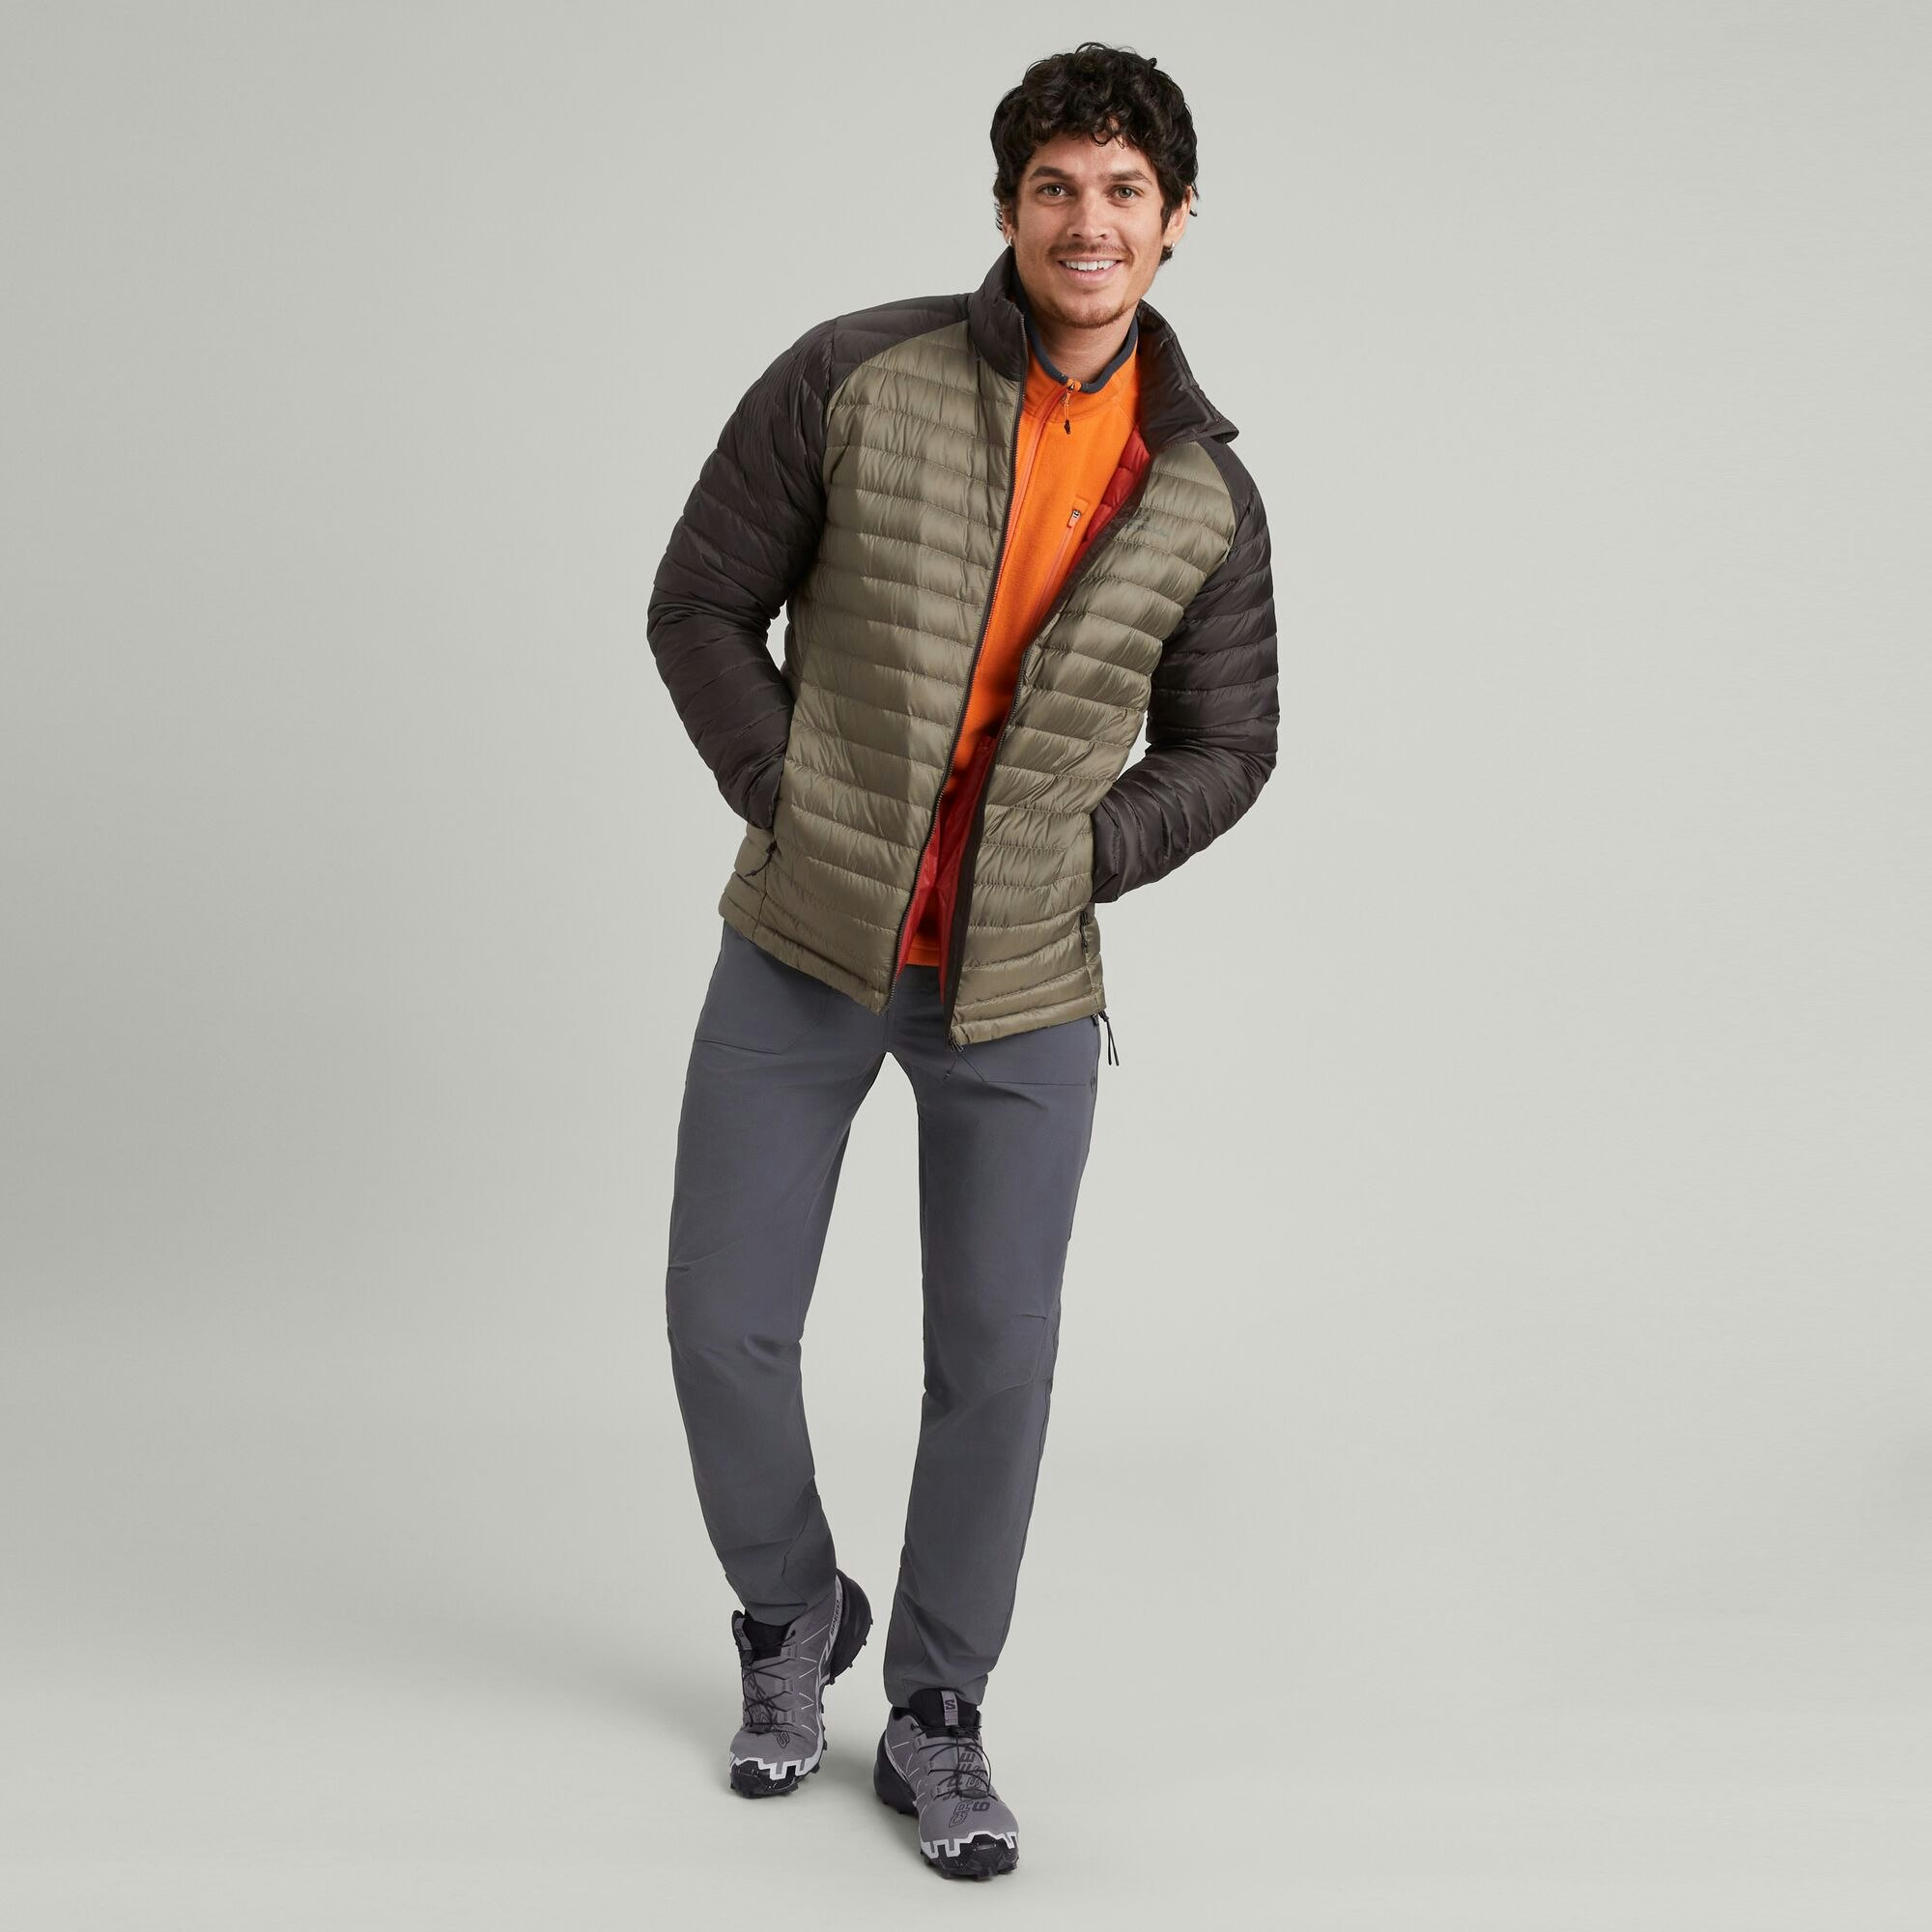 Mens Feather Puffer Jacket: Zip Up Designer Jacket In Classic Co Ed Style,  Long Sleeve Cardigan, Famous Brand Down Northfaces Jackets From Ly613,  $51.74 | DHgate.Com